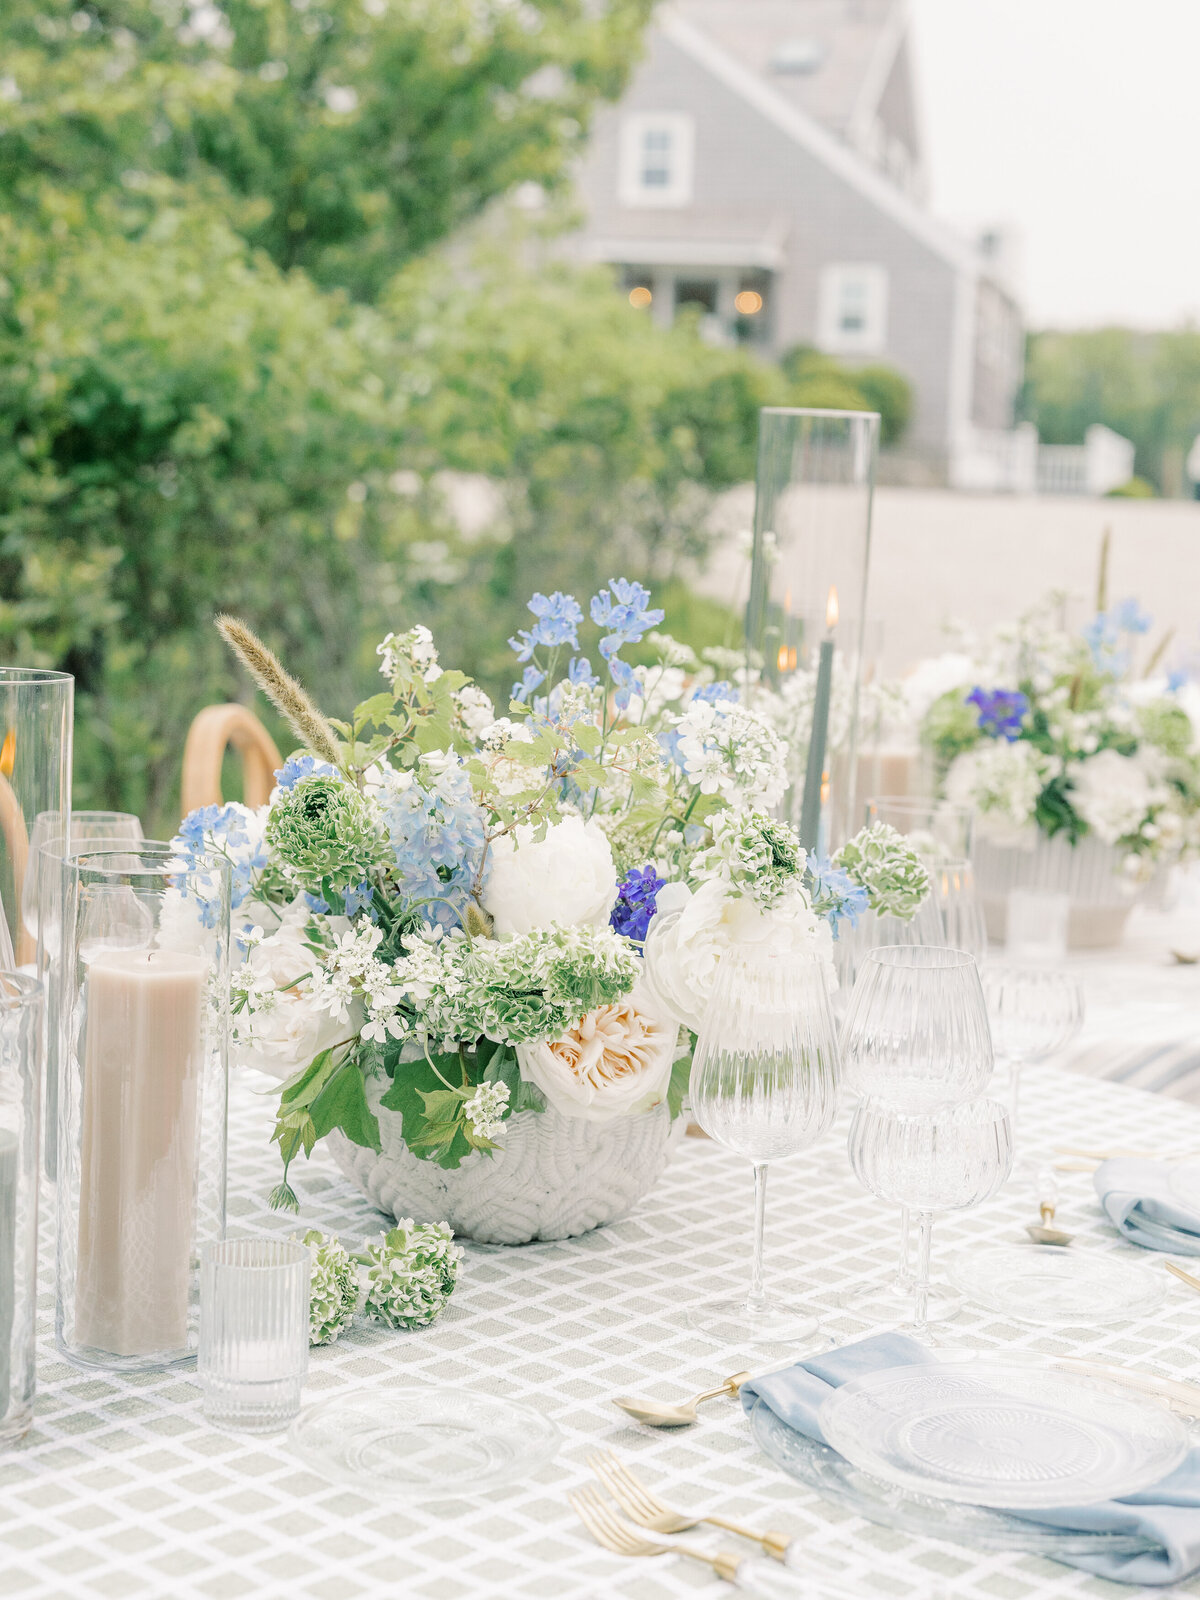 Wedding reception table setting with clear plates, blue napkins, and blue and white floral centerpieces